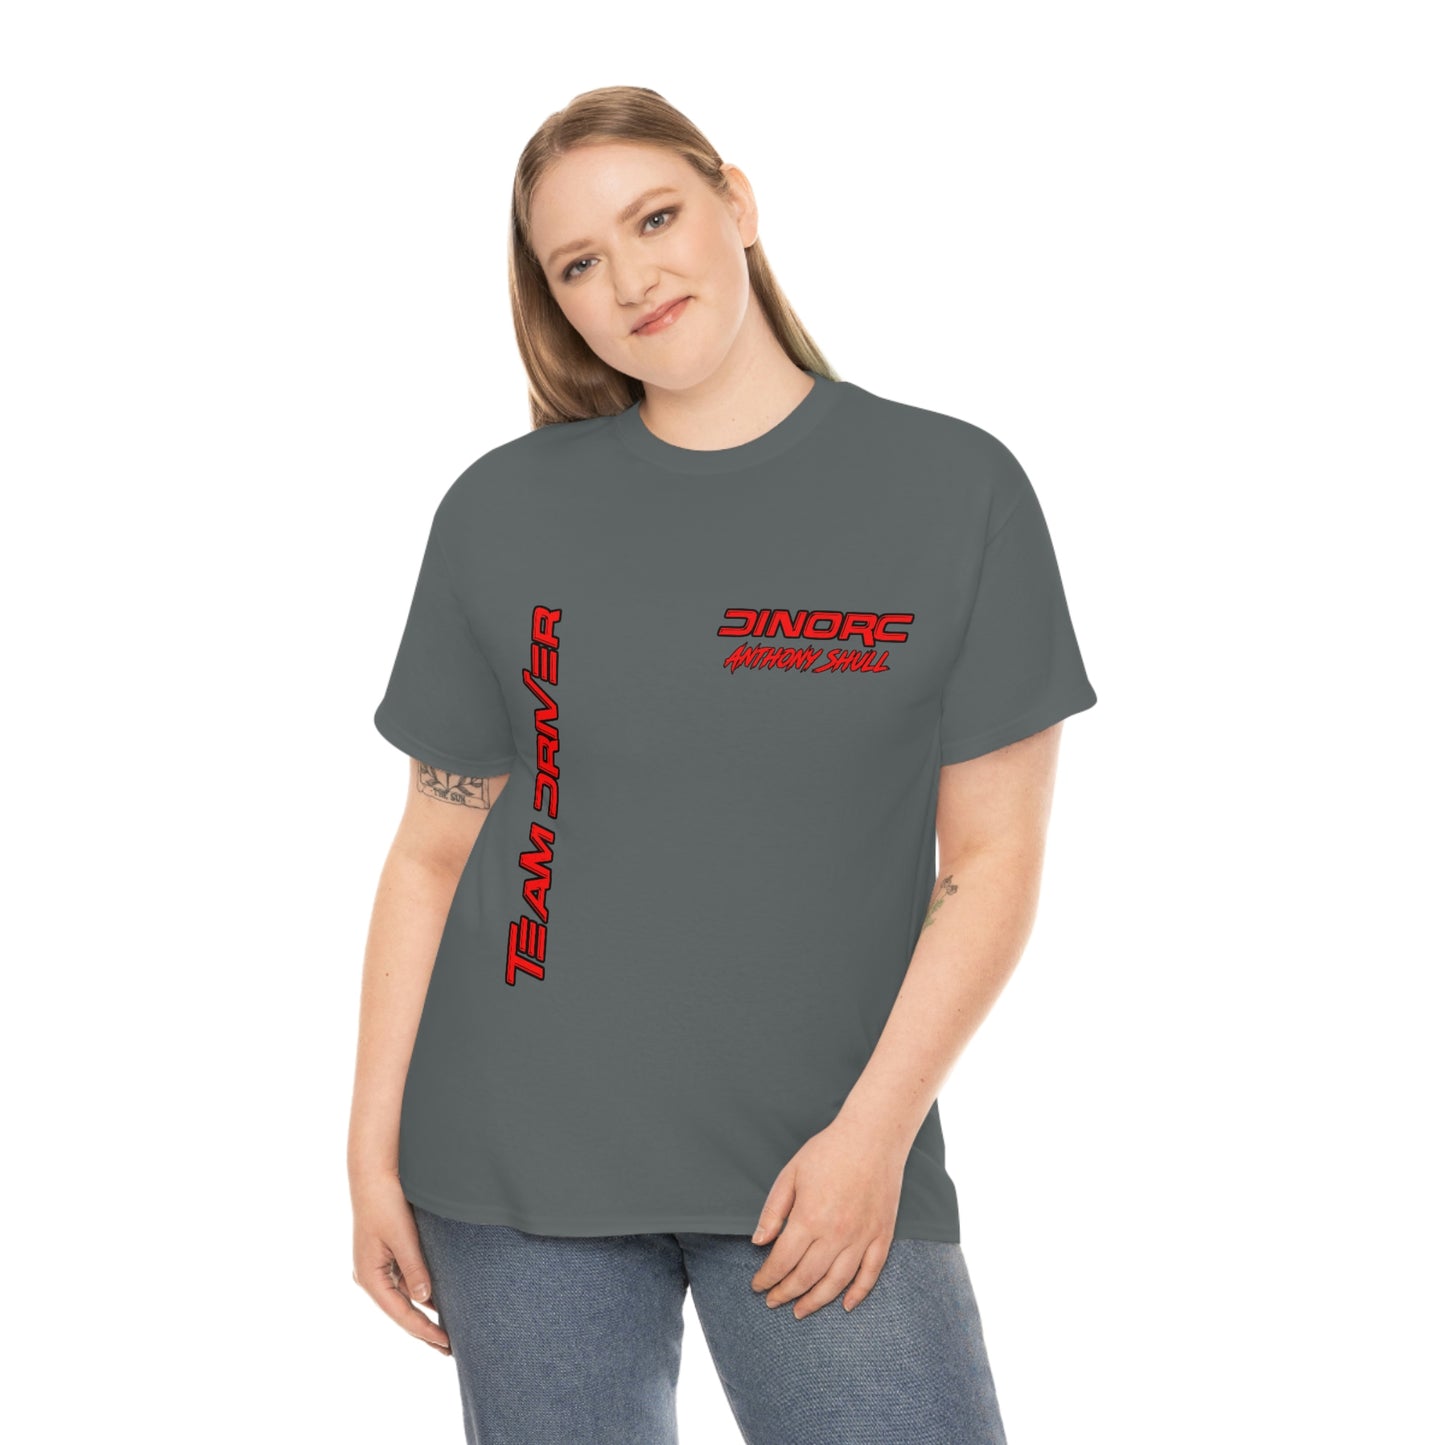 Team Driver Anthony Shull Front and Back DinoRc Logo T-Shirt S-5x 5 colors